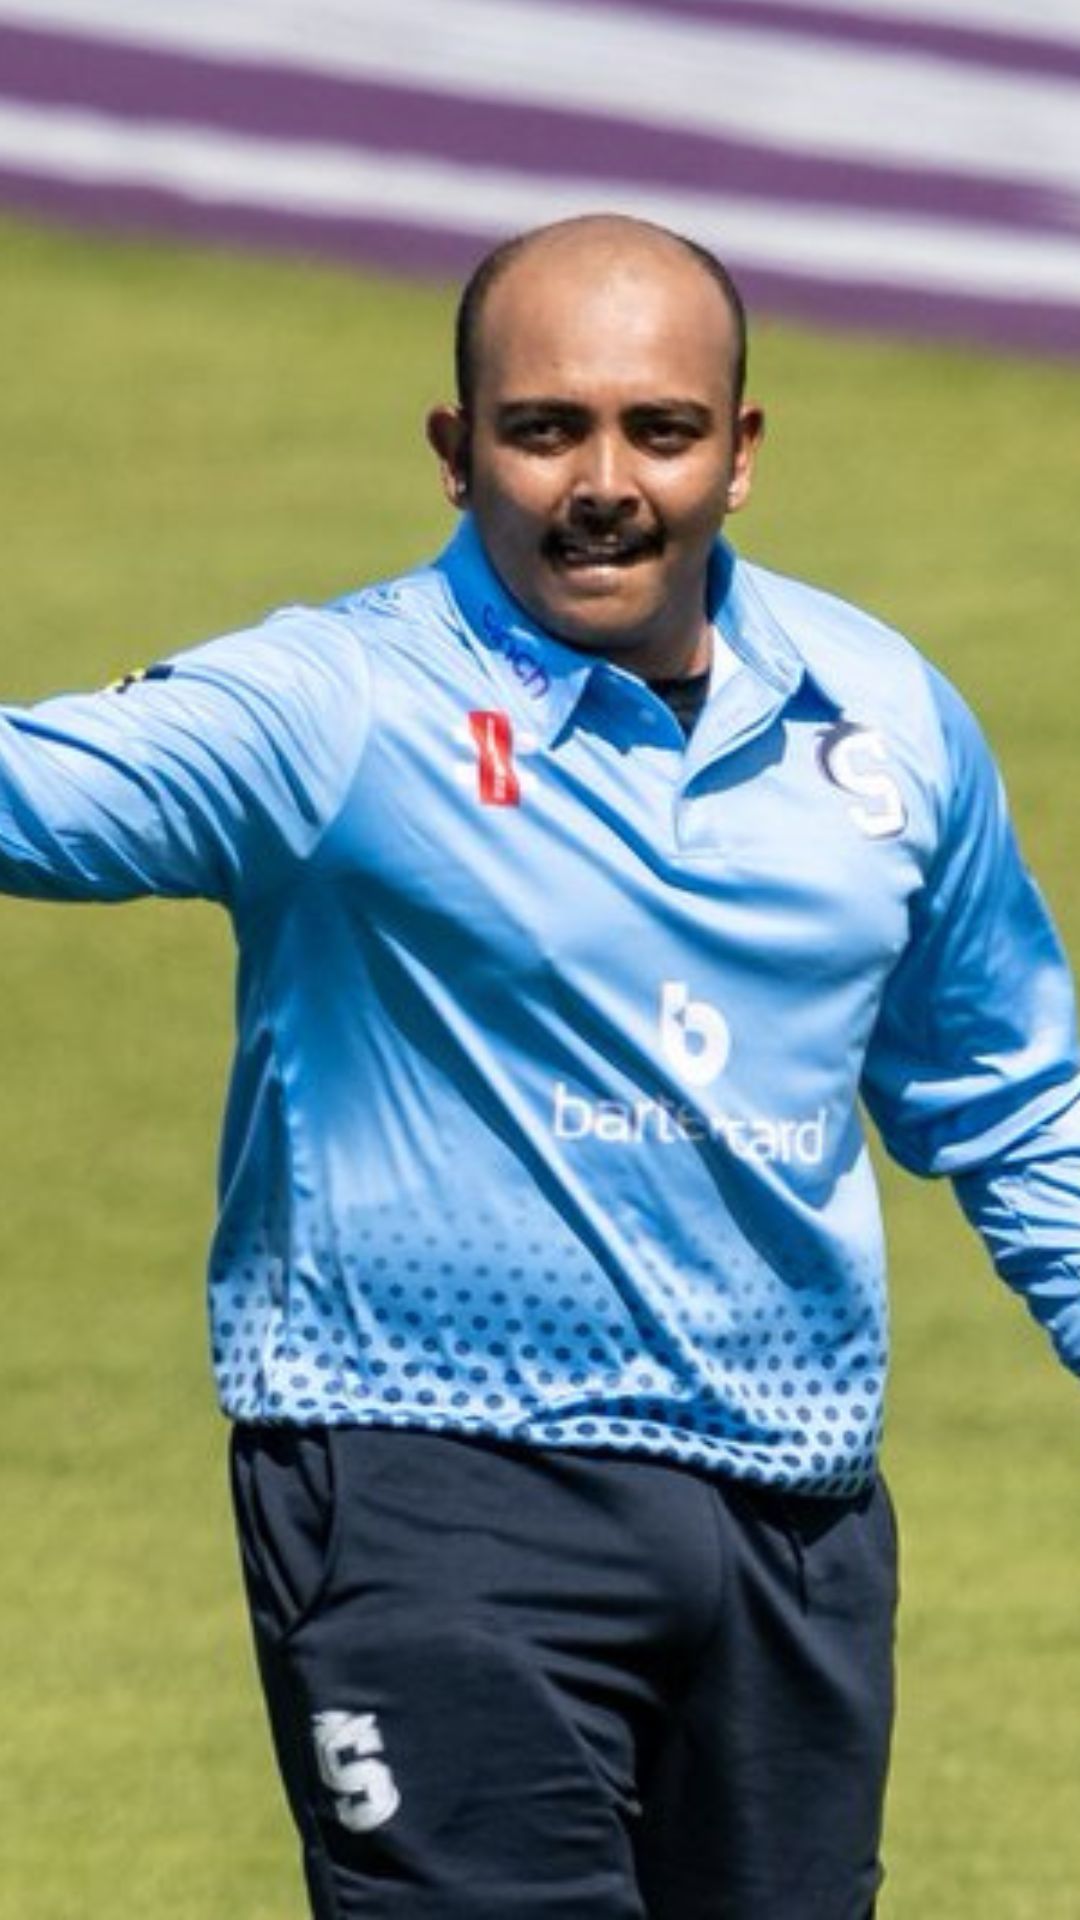 Top 10 batters with highest scores in List A cricket, Prithvi Shaw features twice with latest double hundred